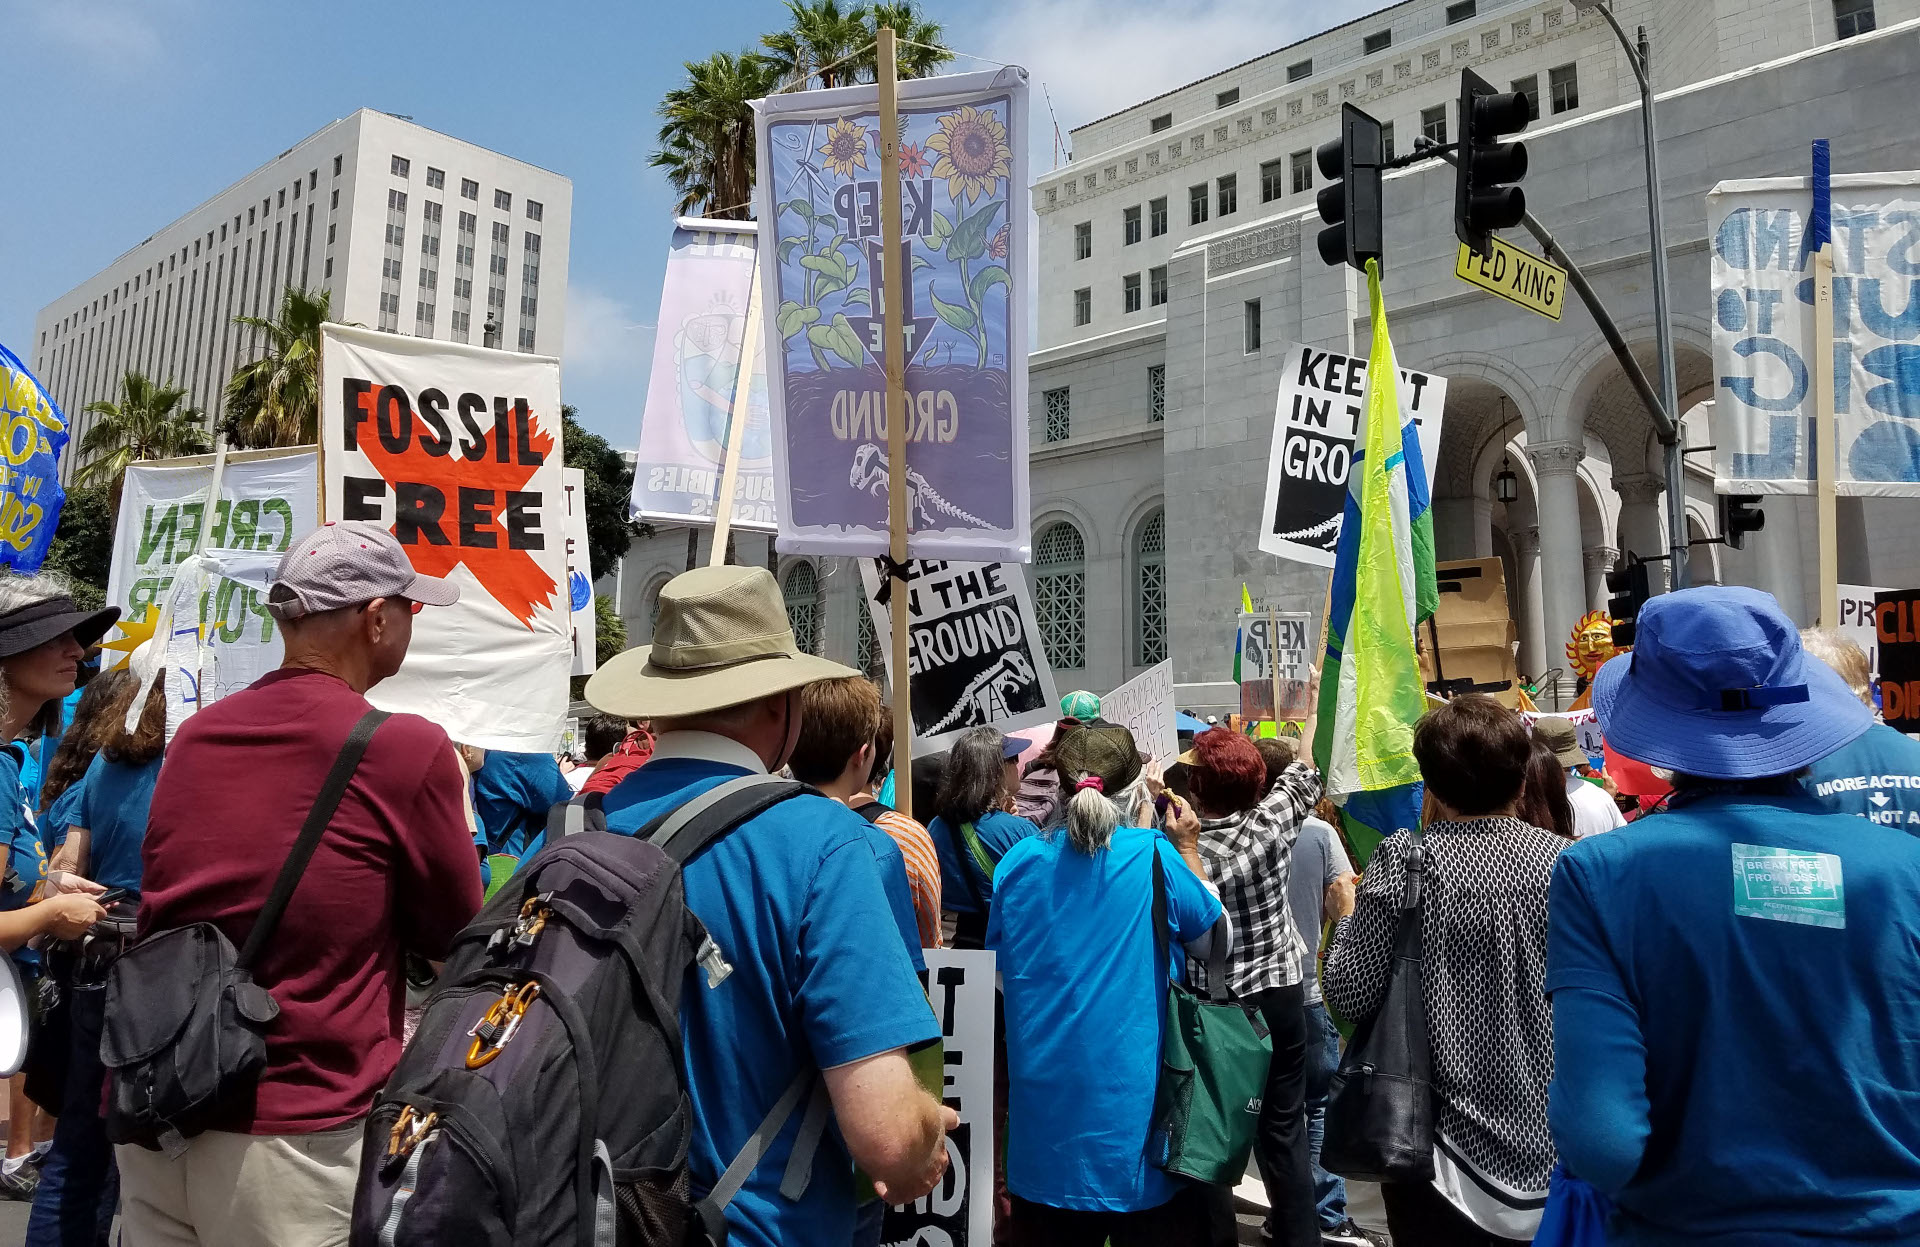 participants at the Fossil Free LA march